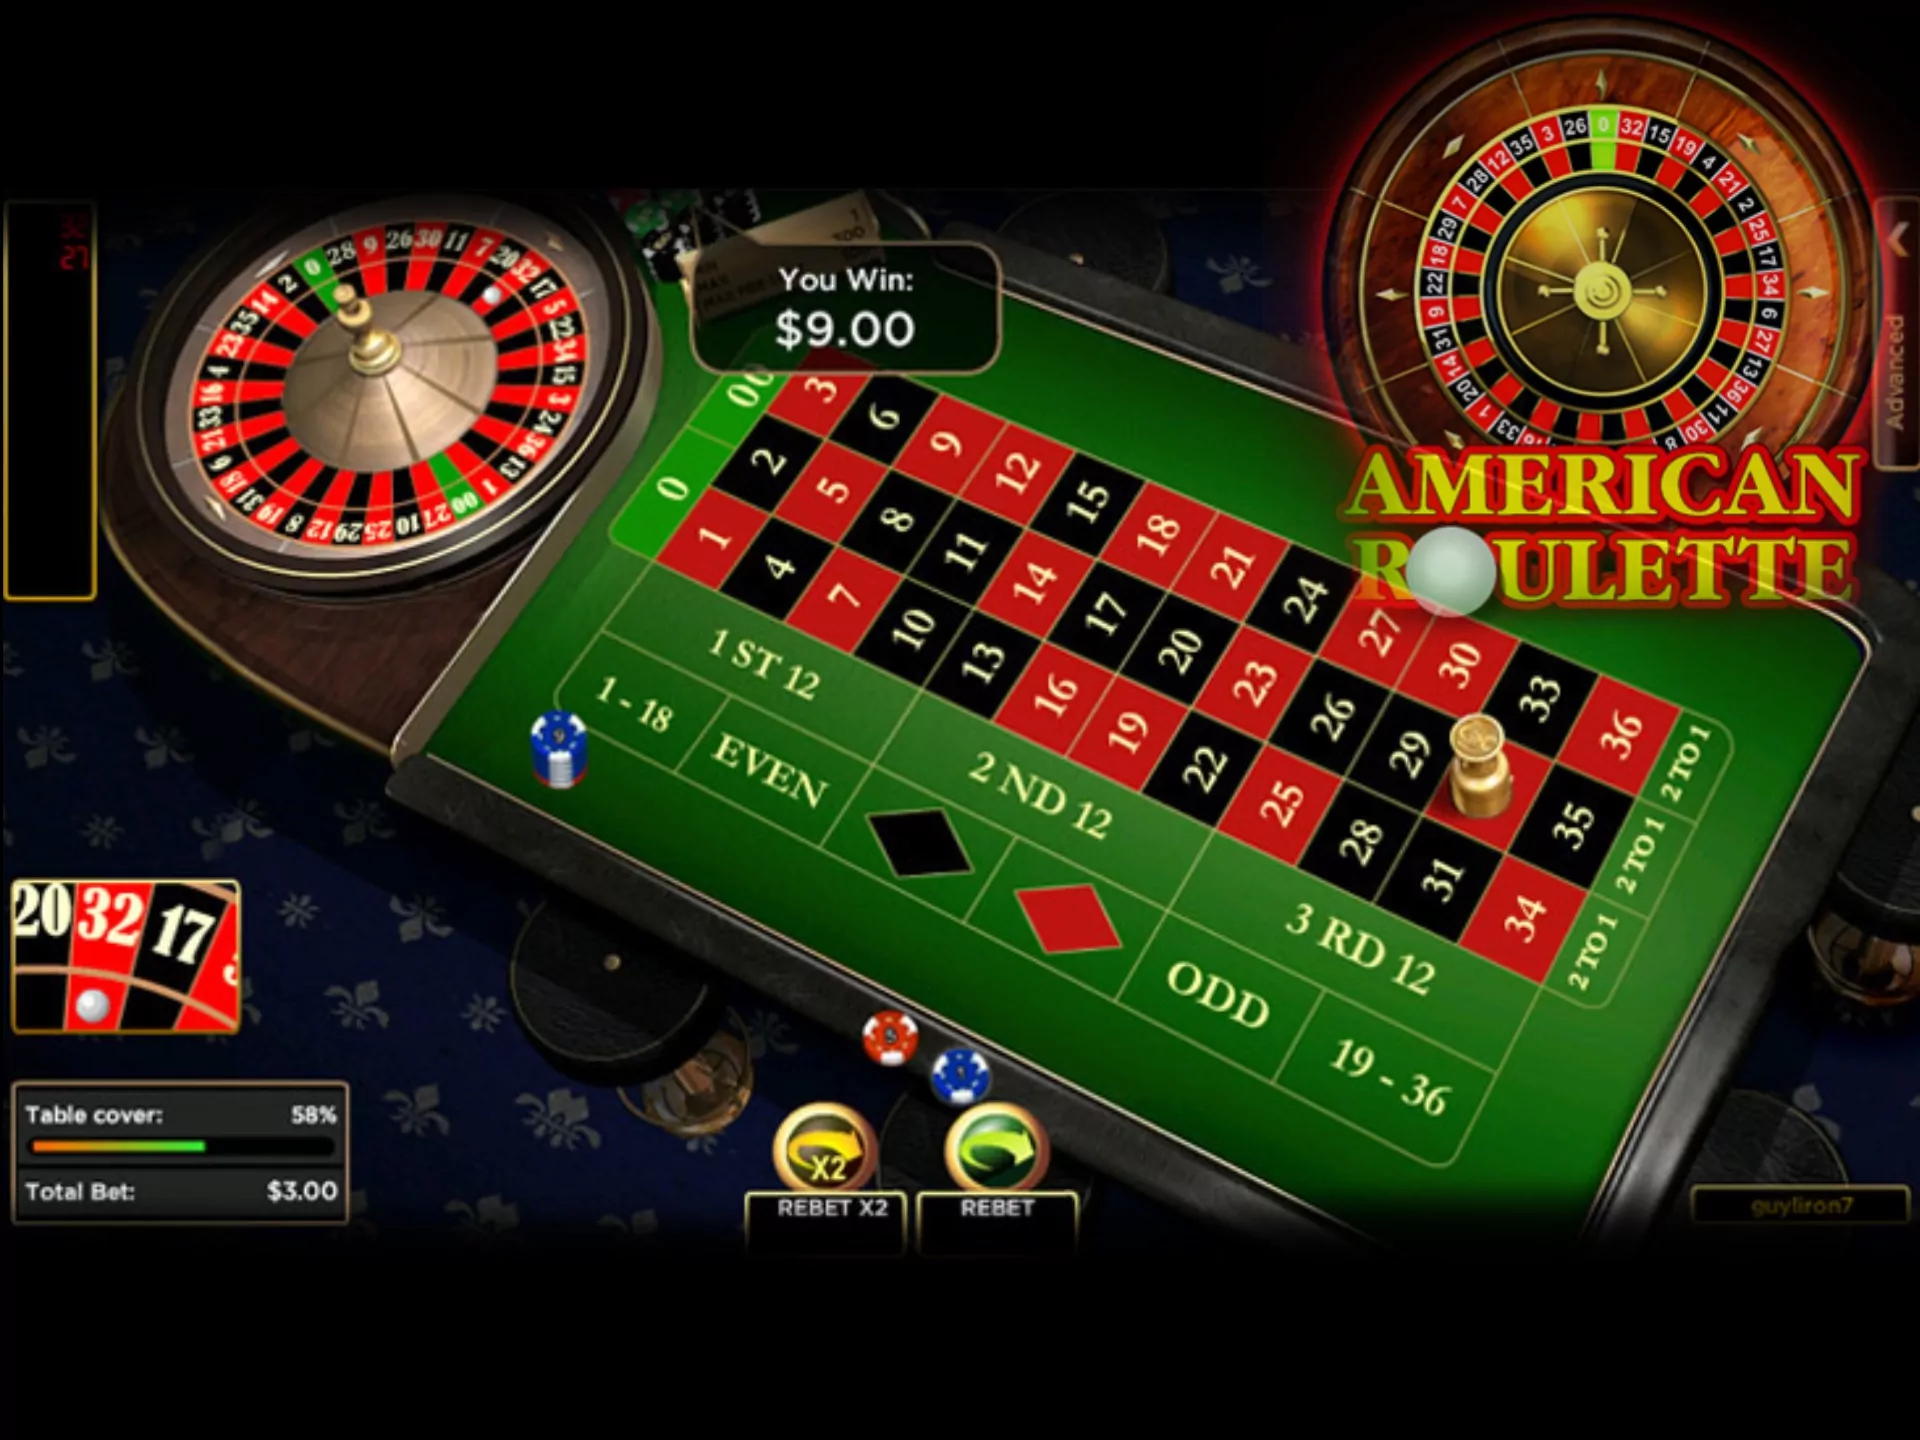 American roulette is rather famous among gamblers and is available at many online casinos.